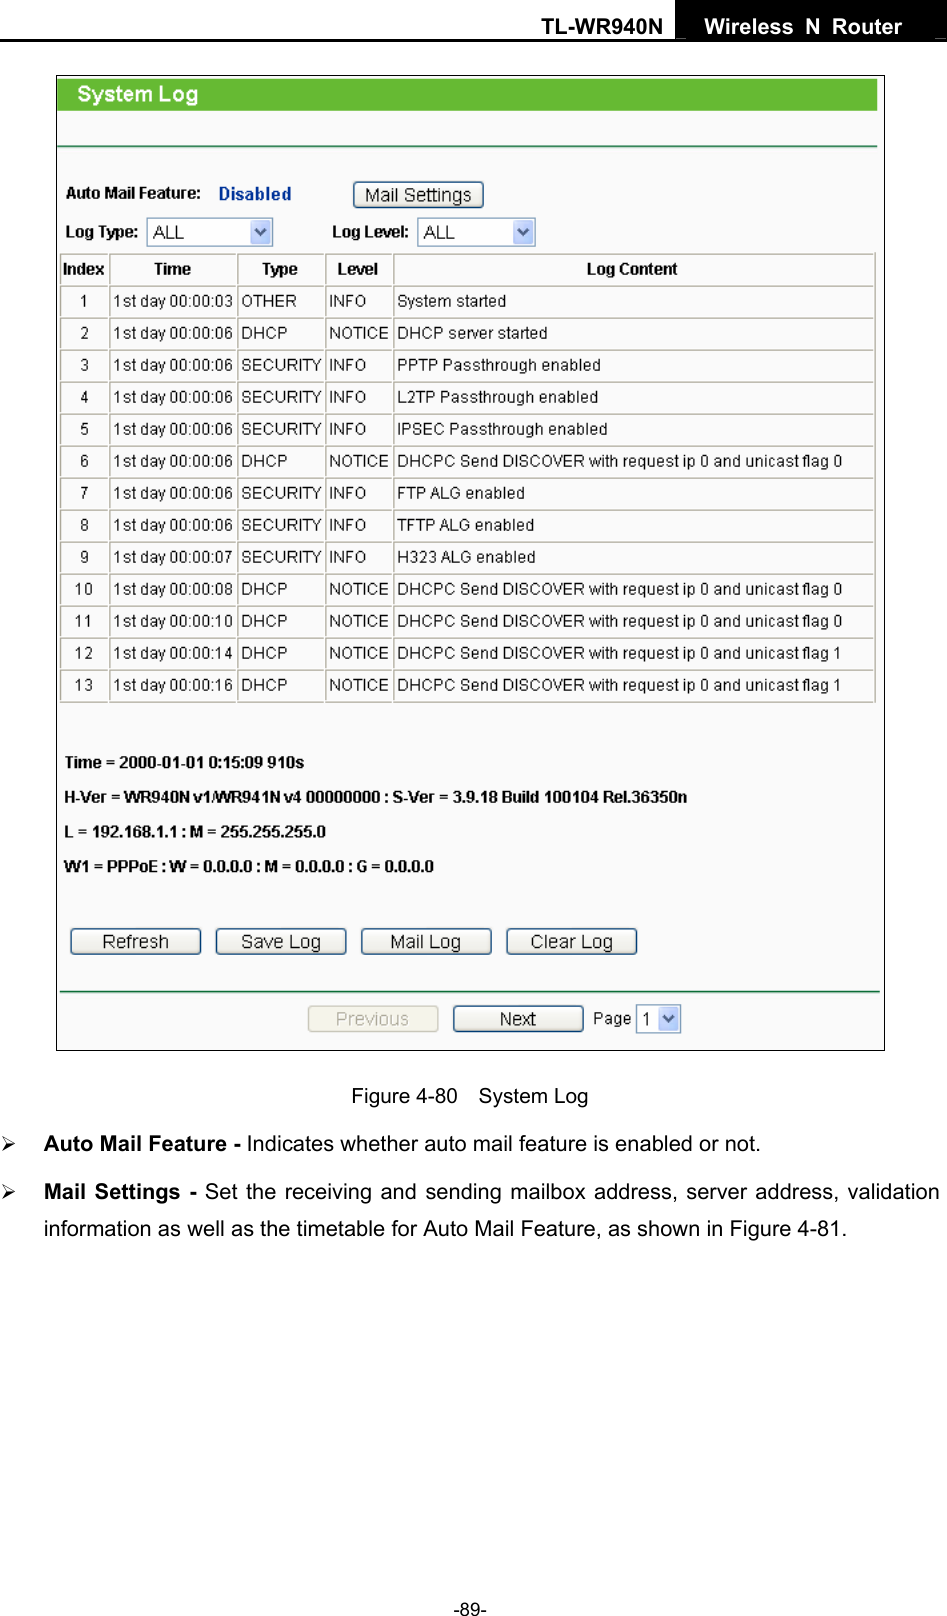 TL-WR940N  Wireless N Router    Figure 4-80  System Log ¾ Auto Mail Feature - Indicates whether auto mail feature is enabled or not.   ¾ Mail Settings - Set the receiving and sending mailbox address, server address, validation information as well as the timetable for Auto Mail Feature, as shown in Figure 4-81. -89- 